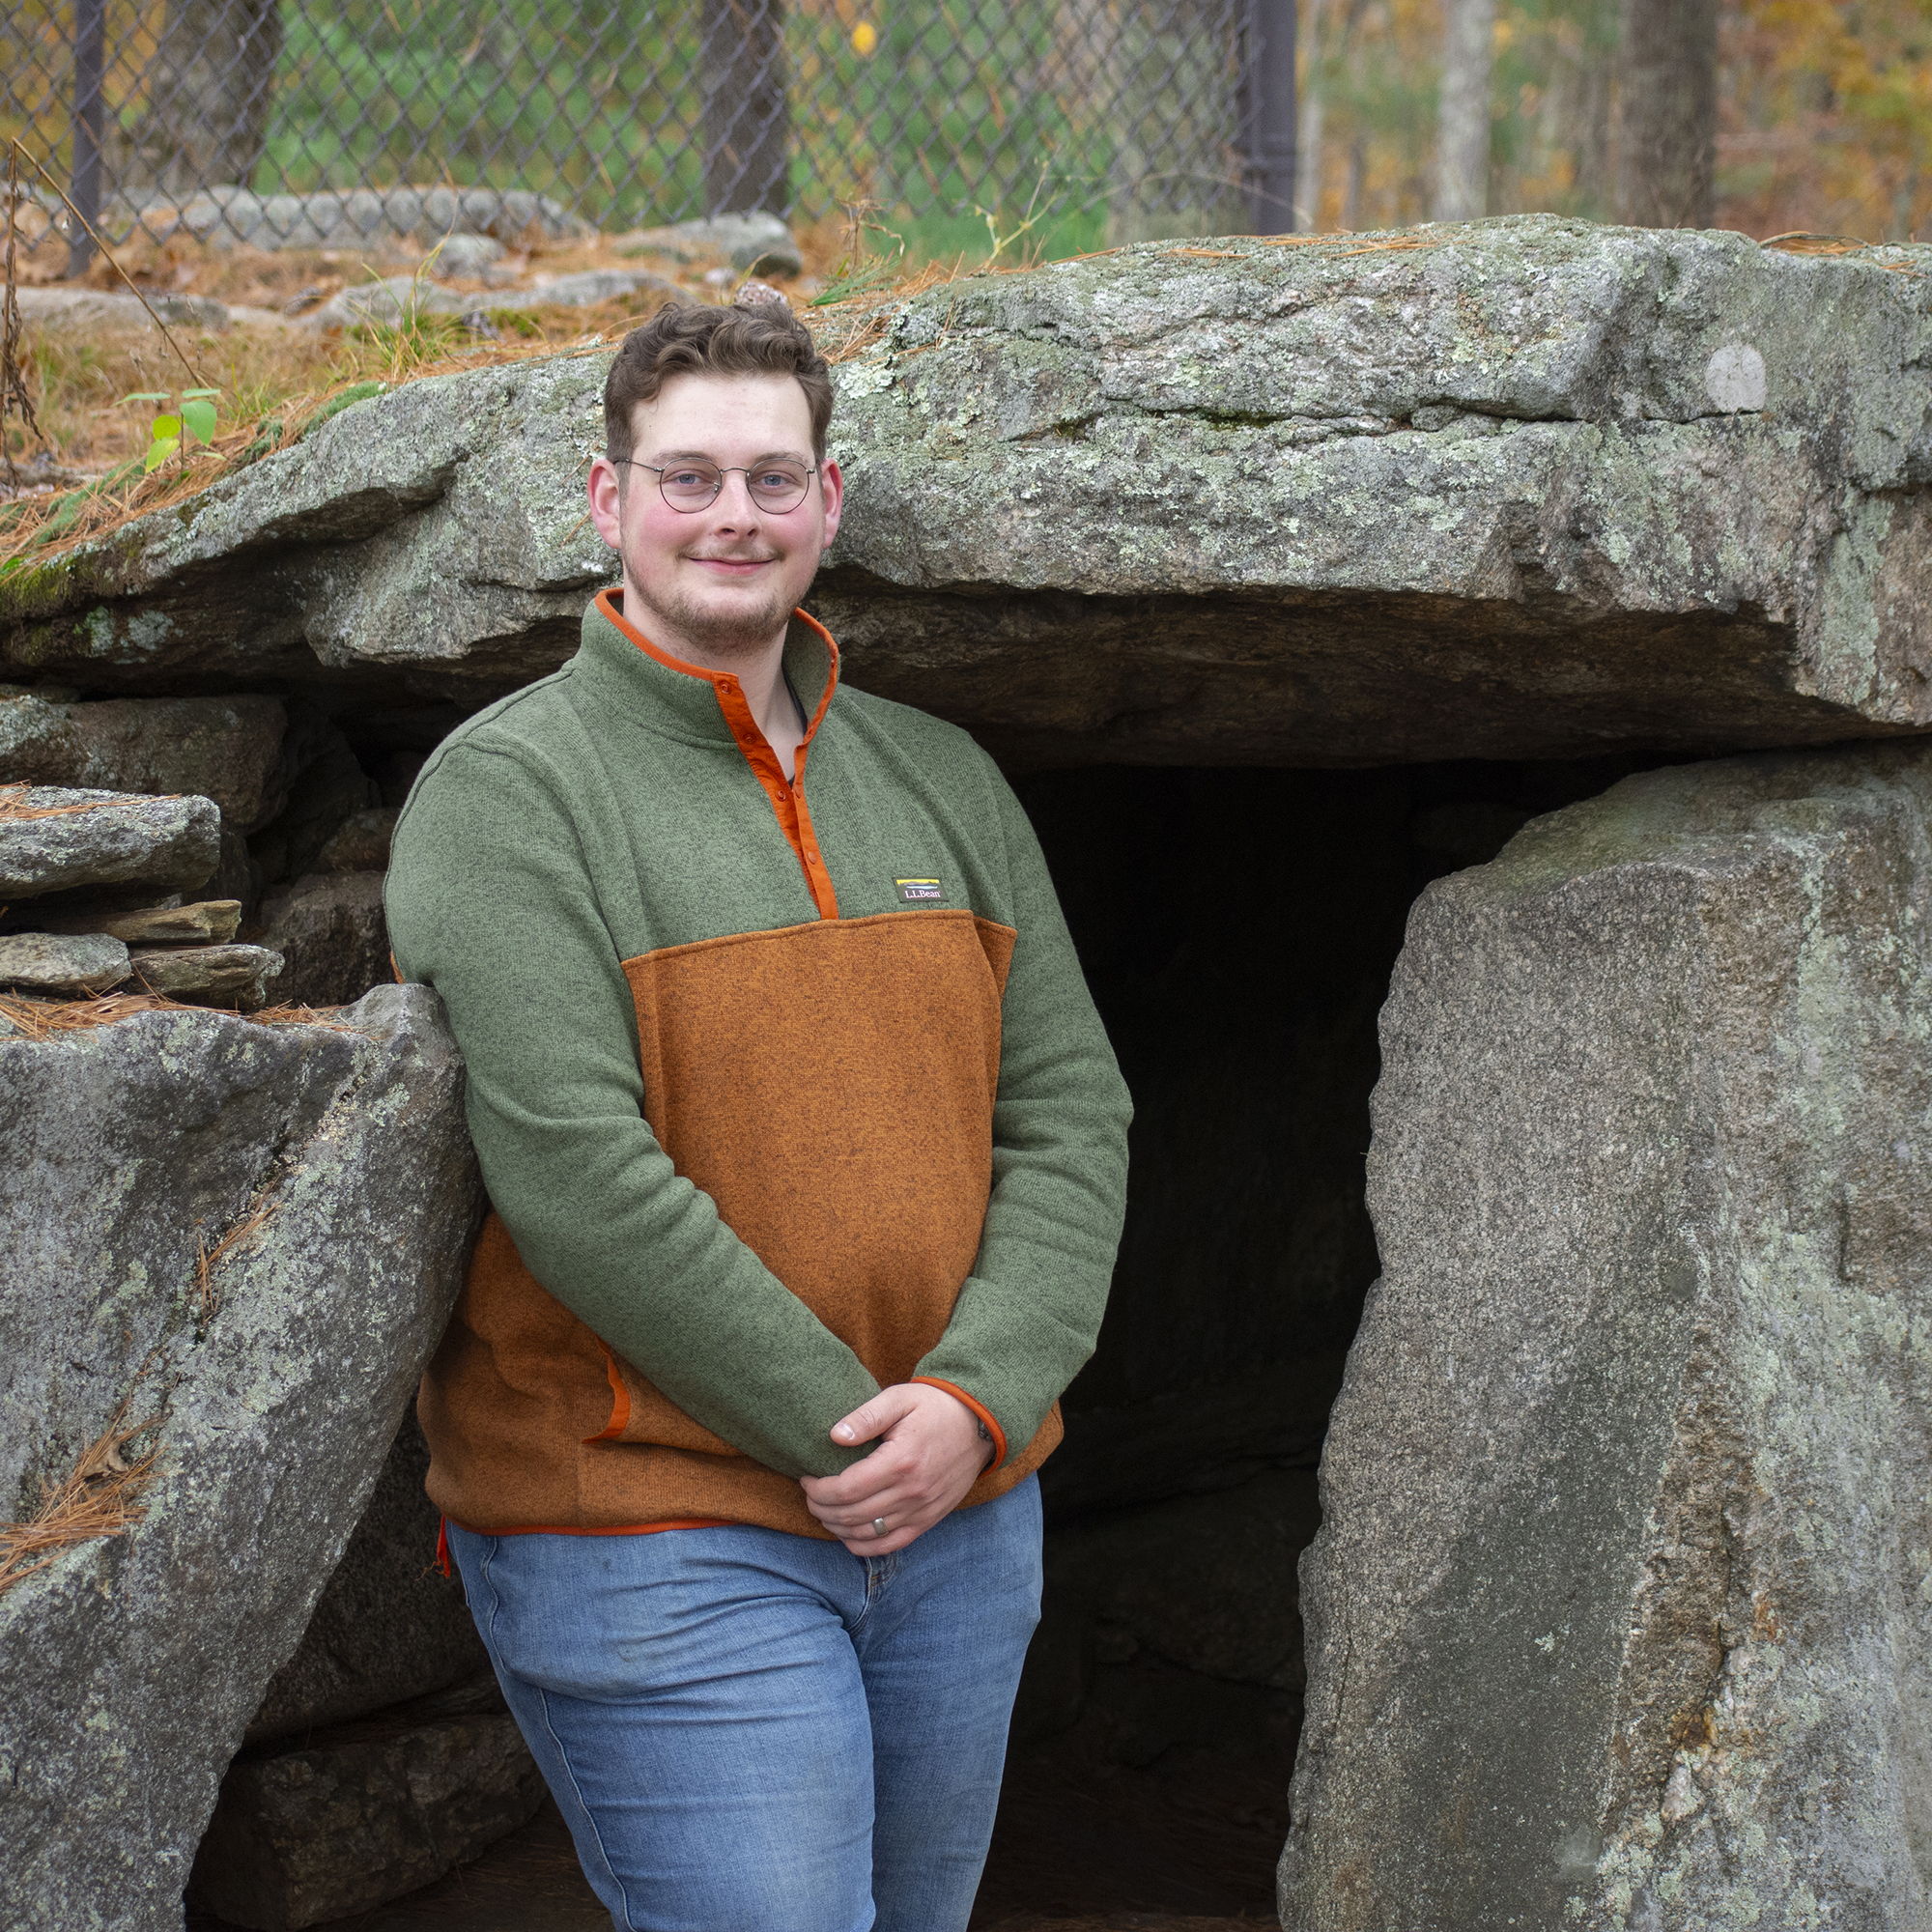 A casually-dressed man in blue jeans and a flannel sweater is relaxed as he leans against the large stone chamber next to him, which rivals his height. A gentle smile crosses his face.